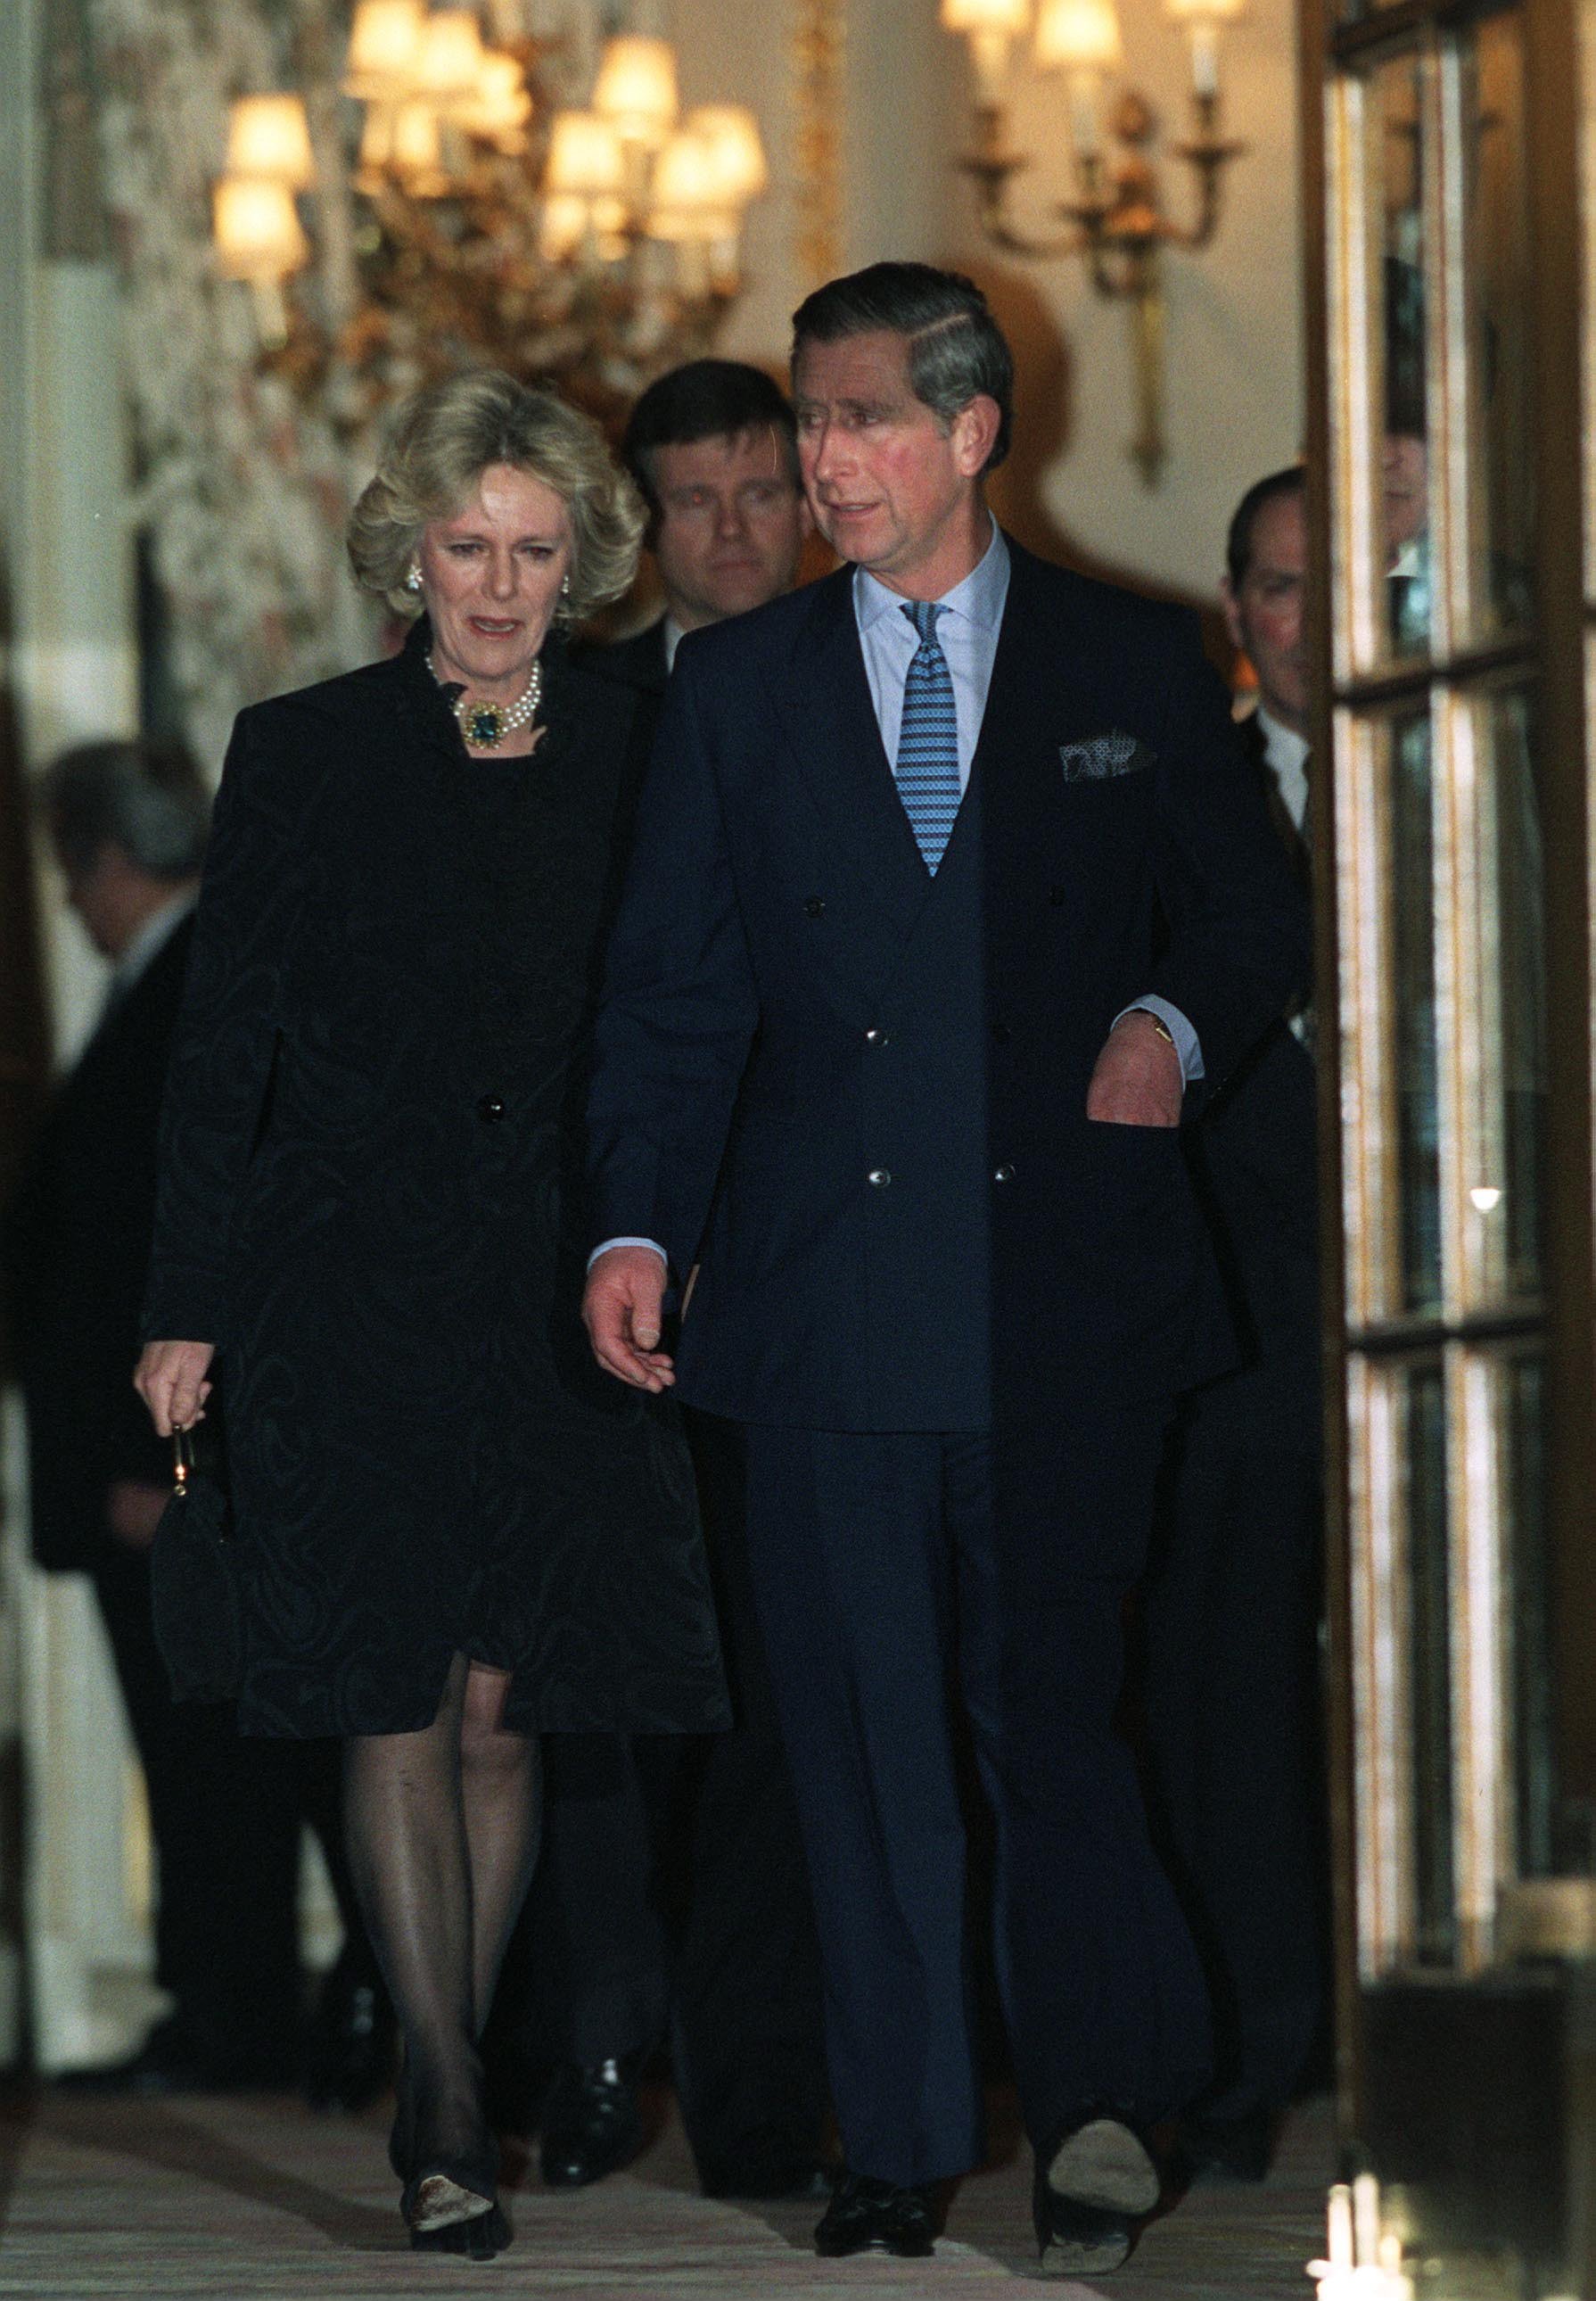 Prince Charles And Camilla Parker-Bowles Leaving The Ritz Hotel In London After Attending A 50th Birthday Party For Camilla's Sister on January 28, 1999 | Source: Getty Images